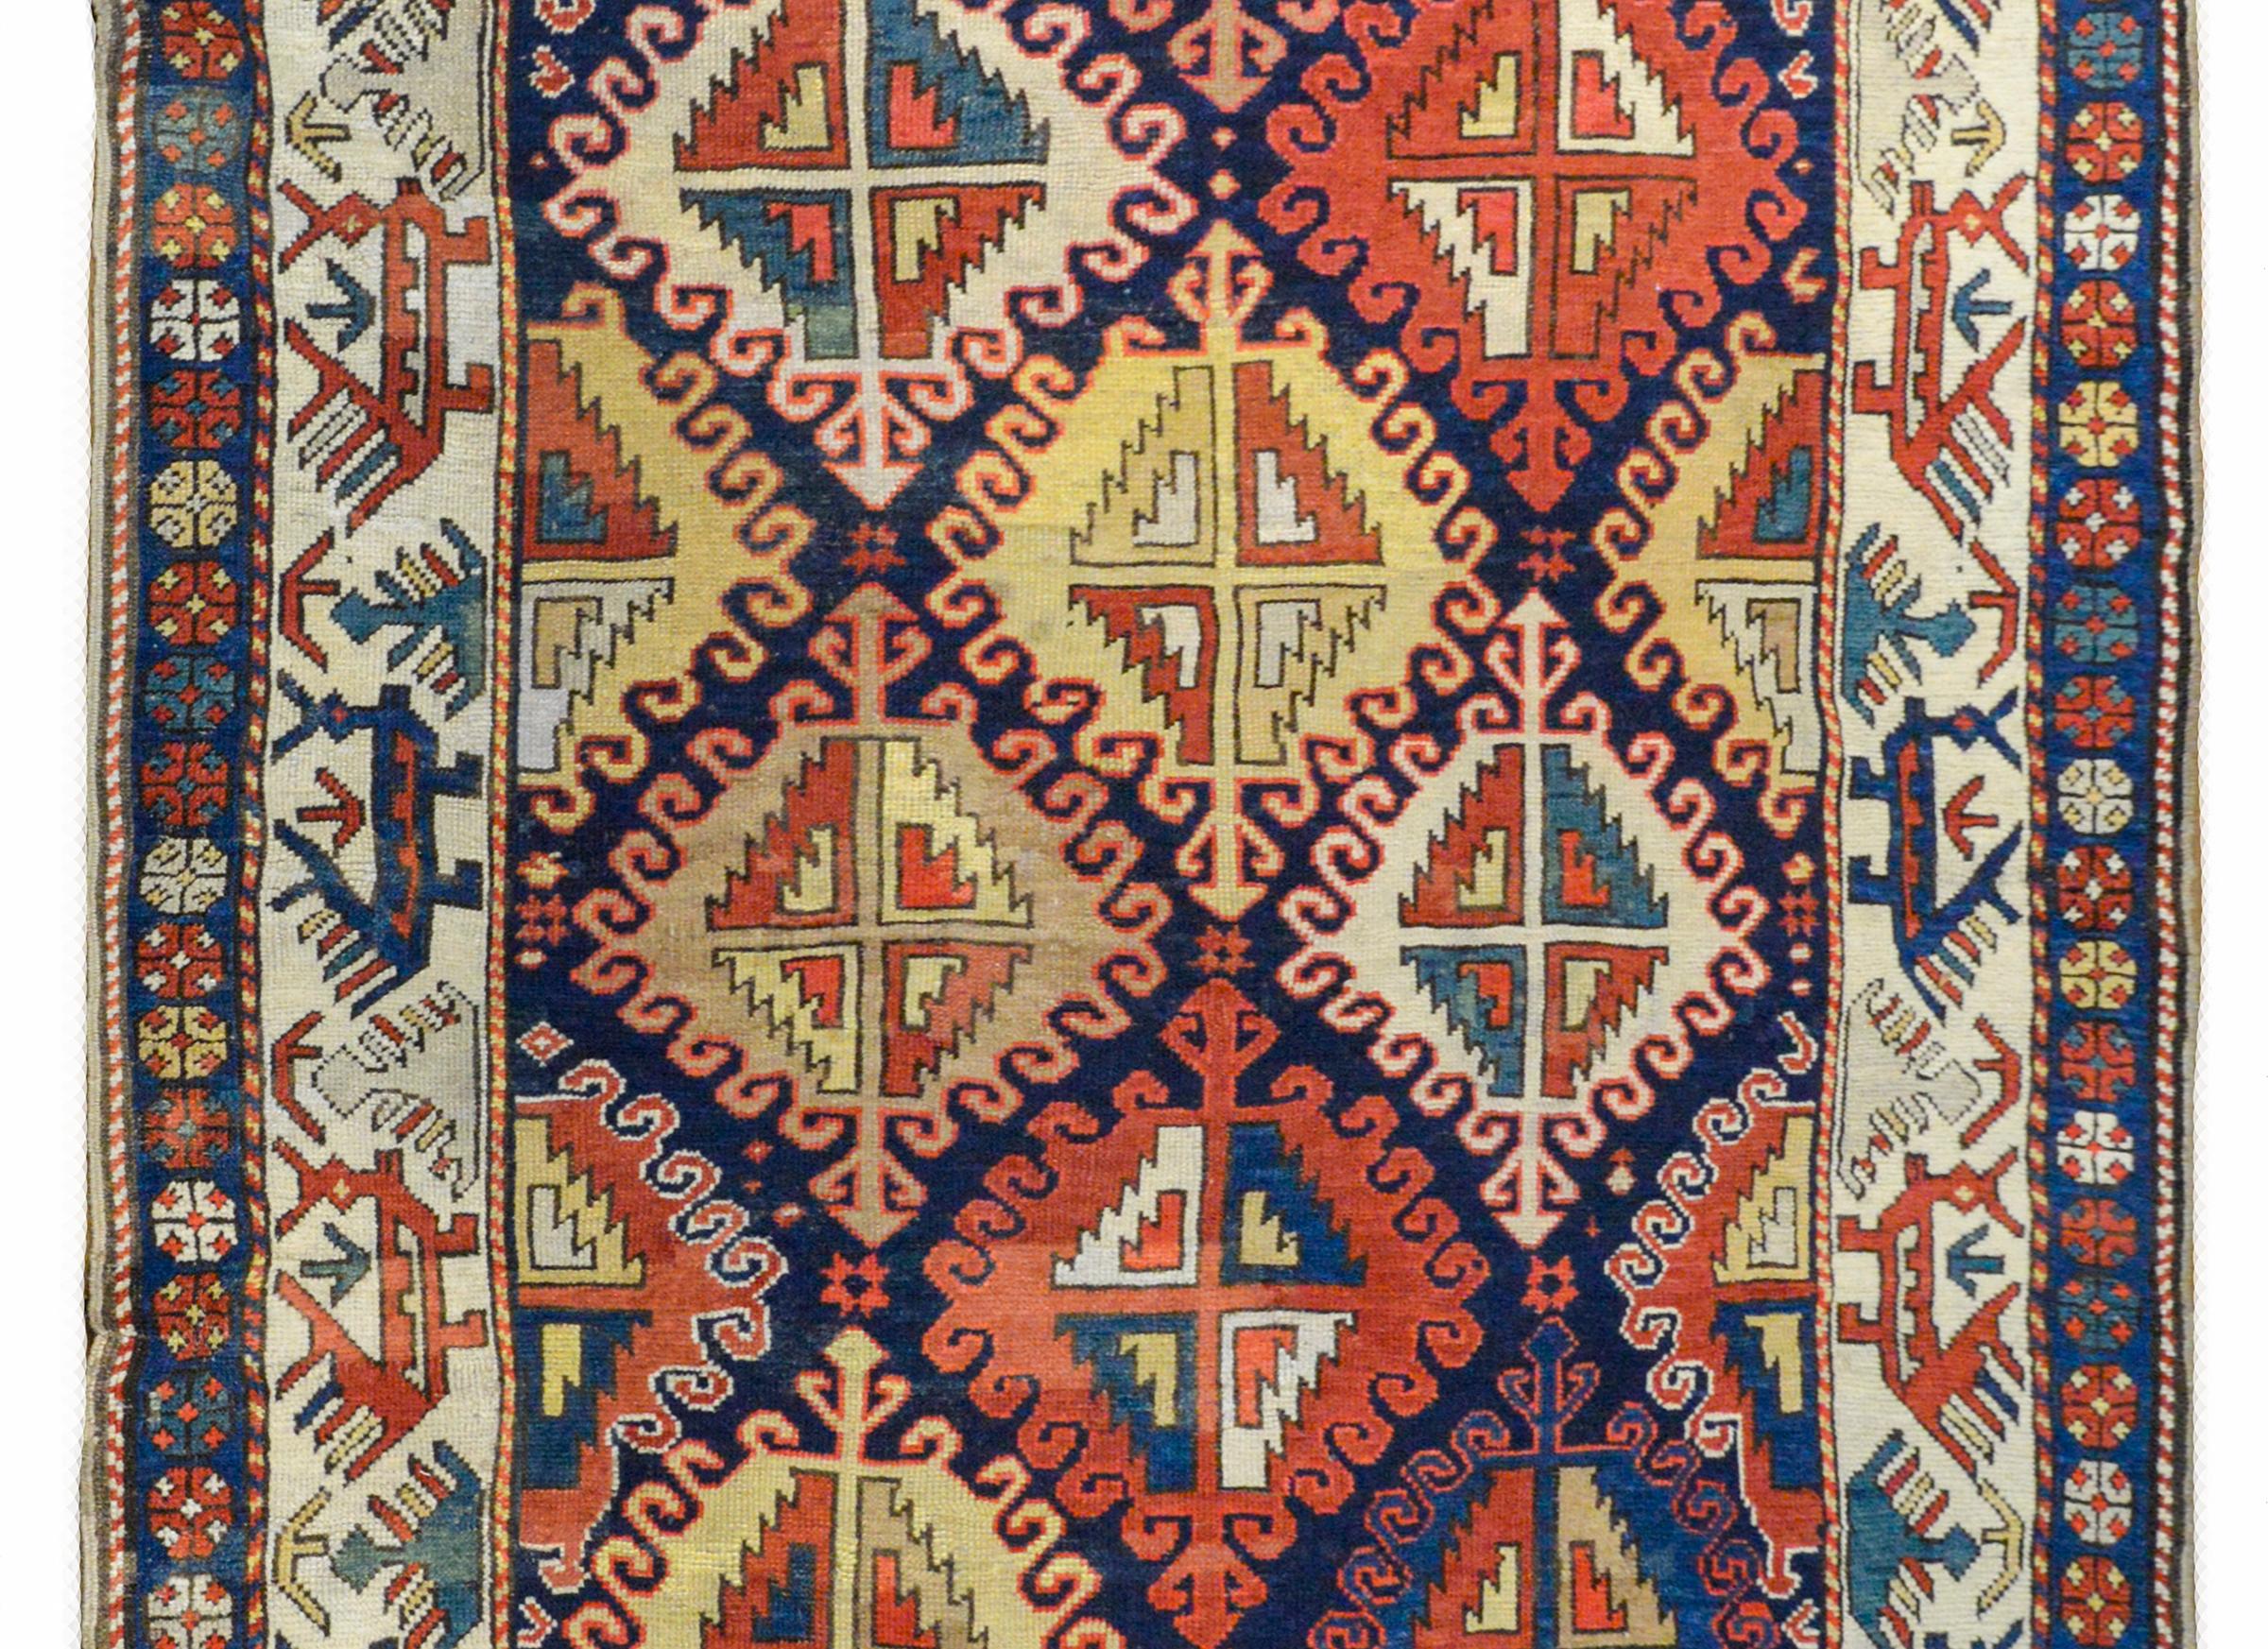 An outstanding late 19th century Kazak rug with the most wonderful bold stylized floral pattern woven in brilliant reds, yellows, greens, and blues, all against a dark indigo background. The border is wonderful with an inner stripe with stylized